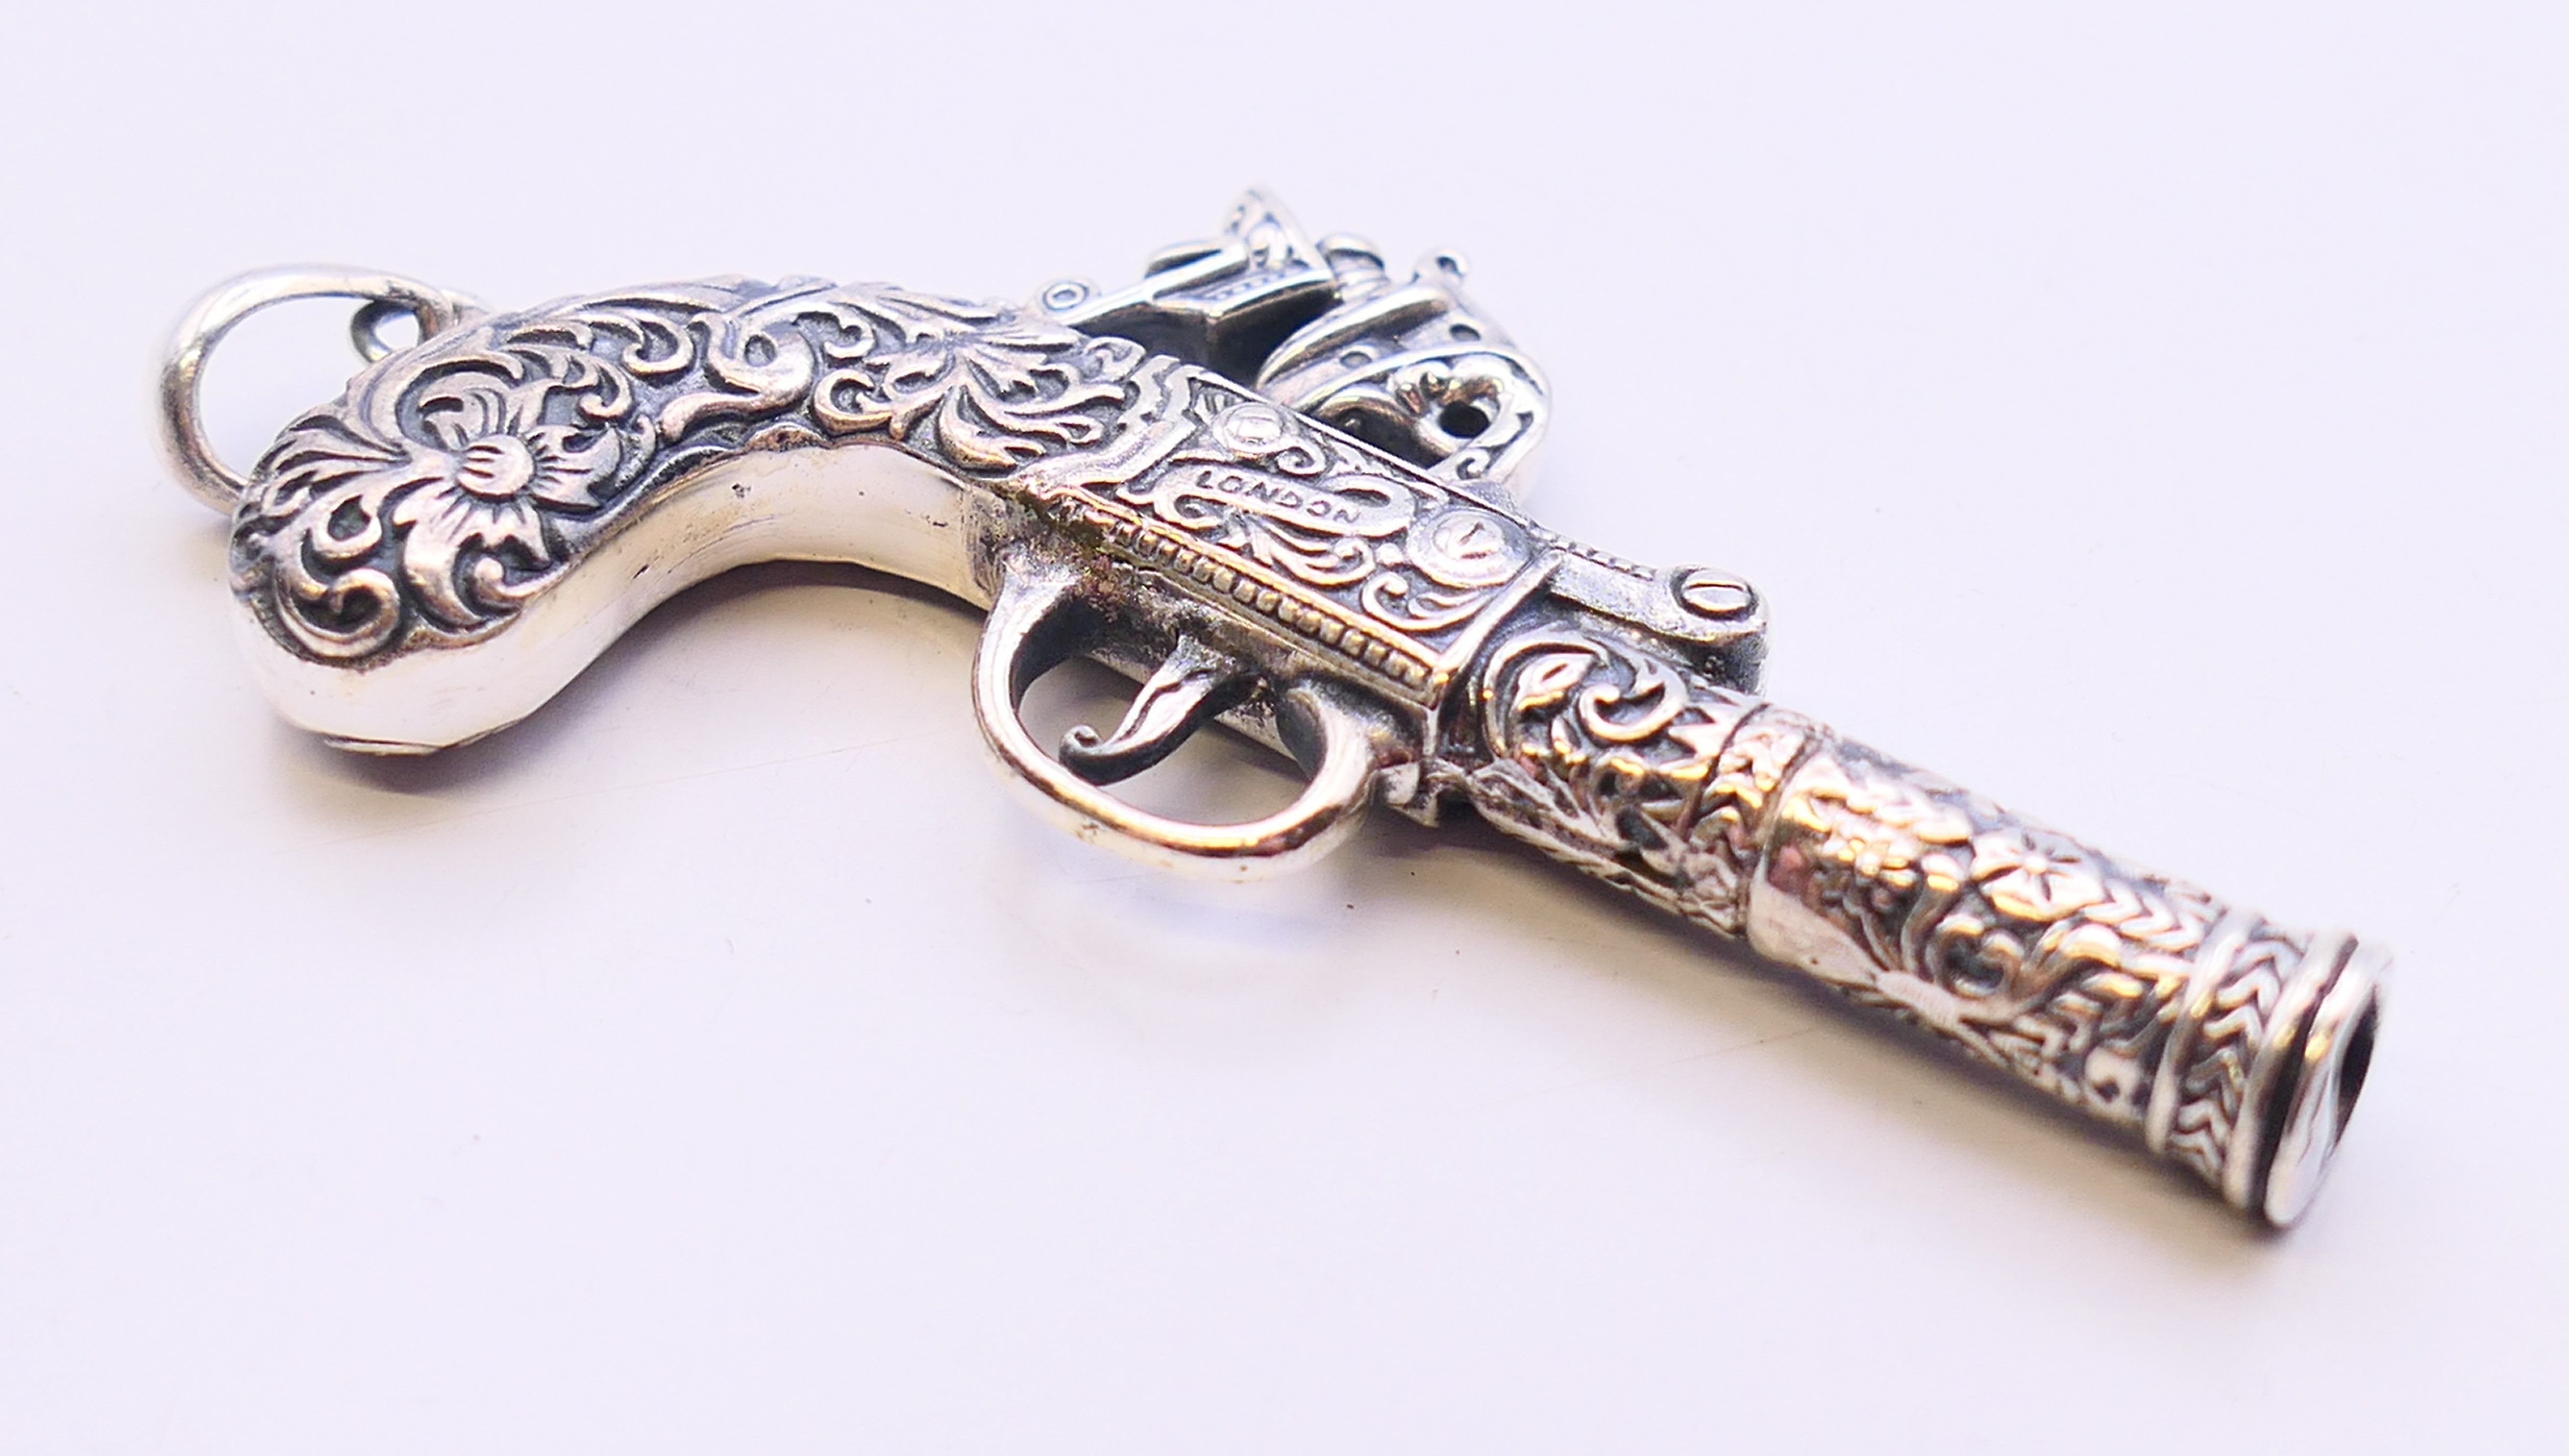 A silver pendant in the form of a pistol. 6.5 cm x 3.5 cm. - Image 2 of 3